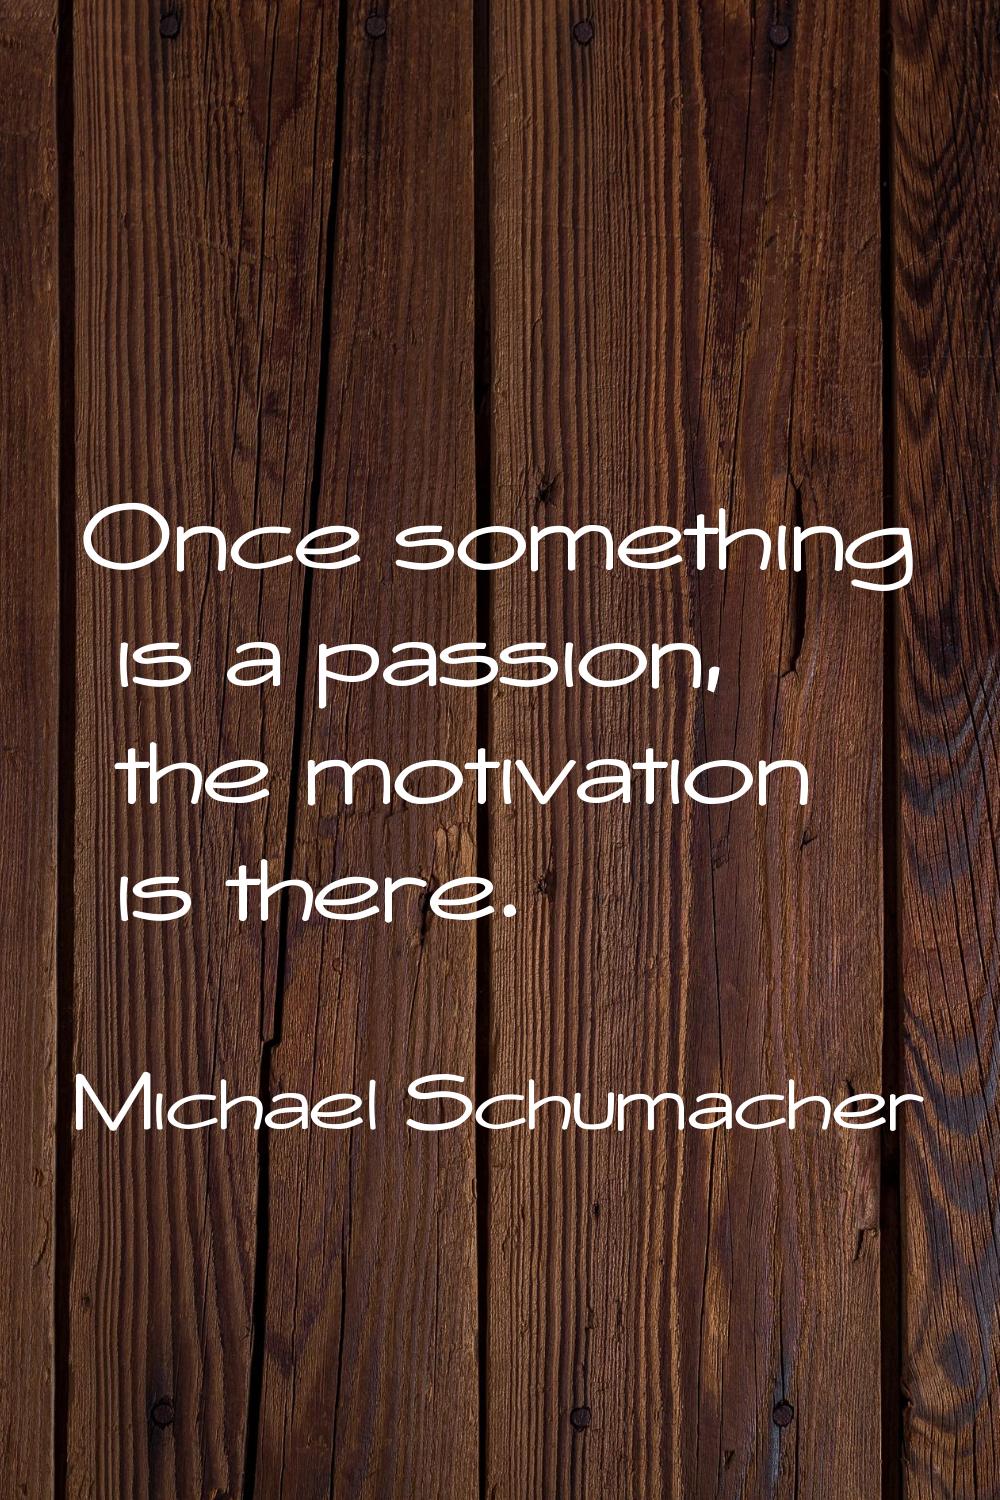 Once something is a passion, the motivation is there.